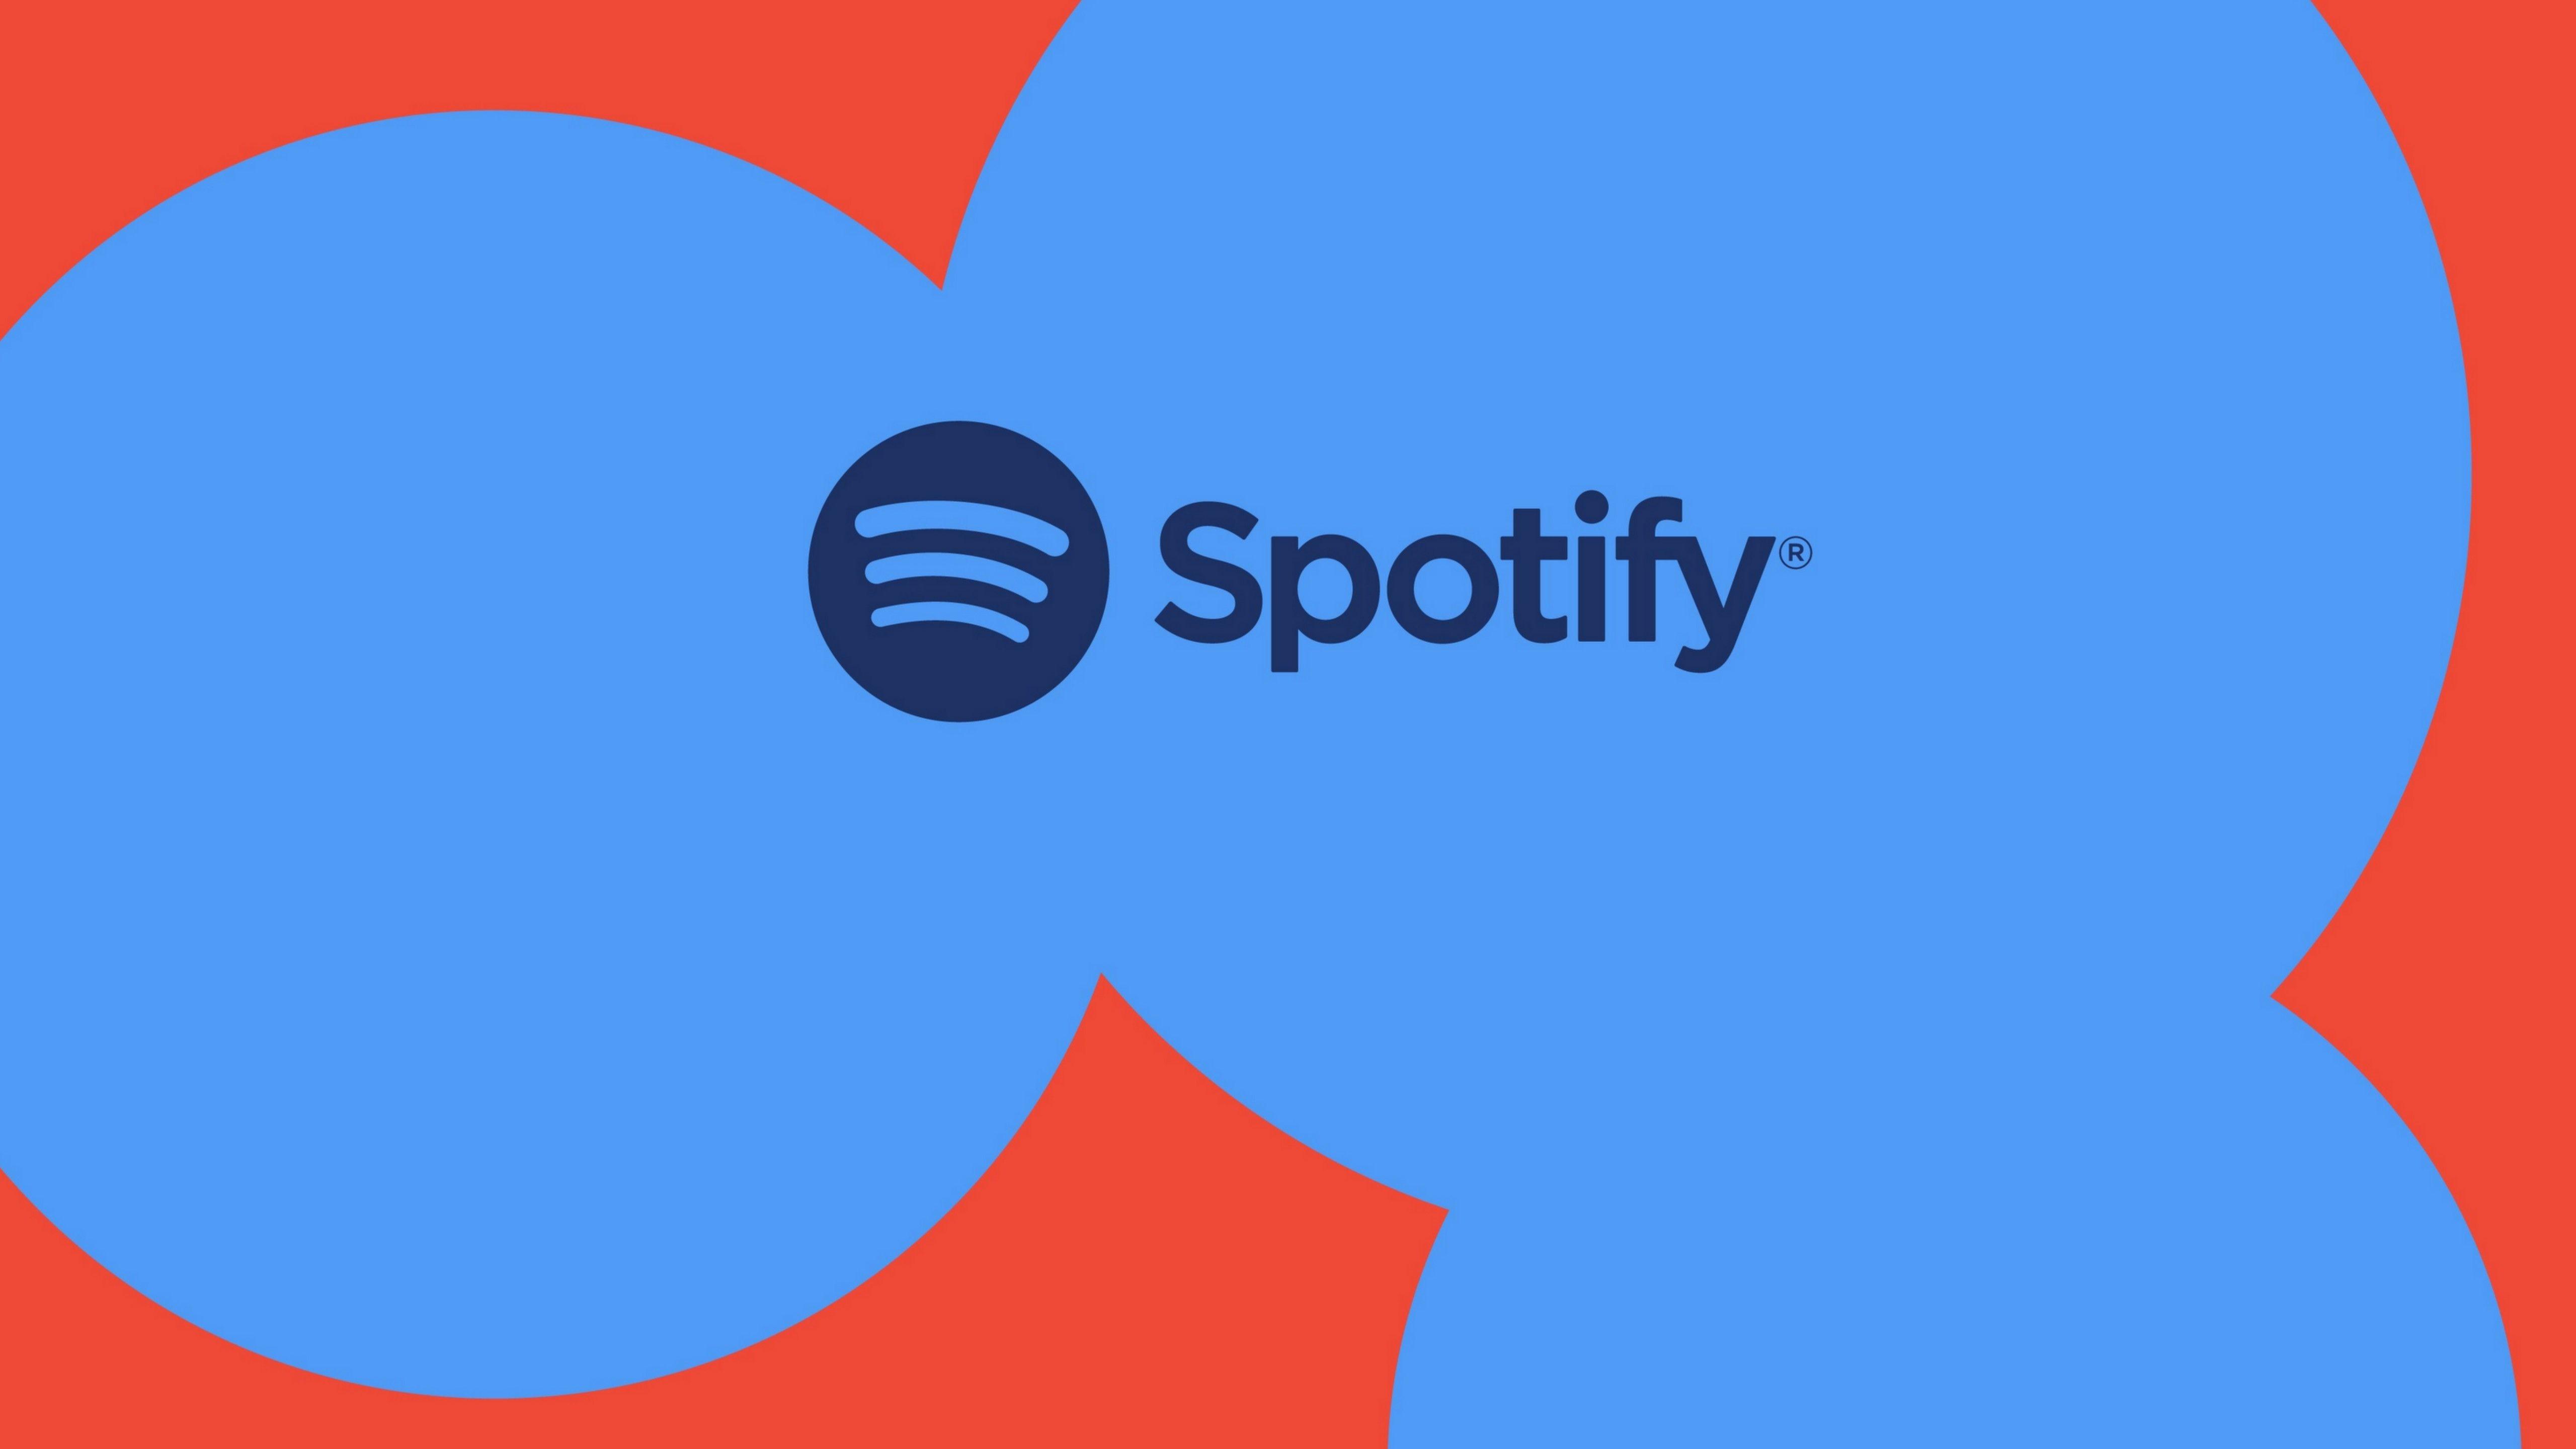 Red and Blue Store Logo - Spotify for Windows 10 available now in the Windows Store | Windows ...